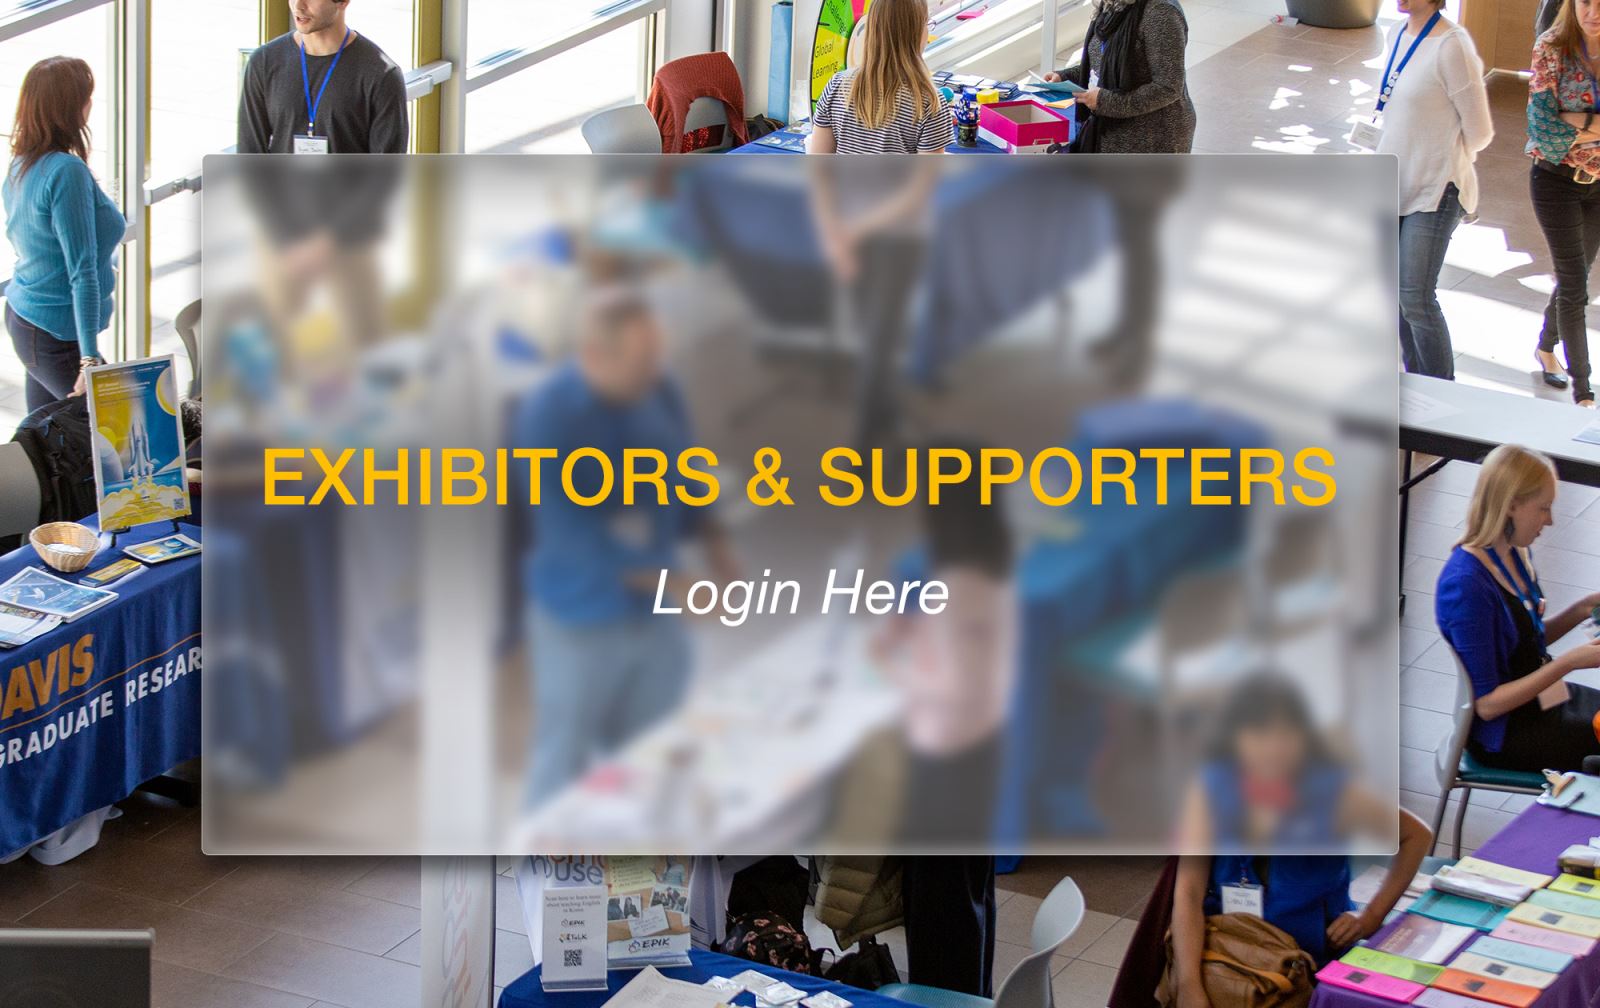 Supporters & Exhibitors Login Here